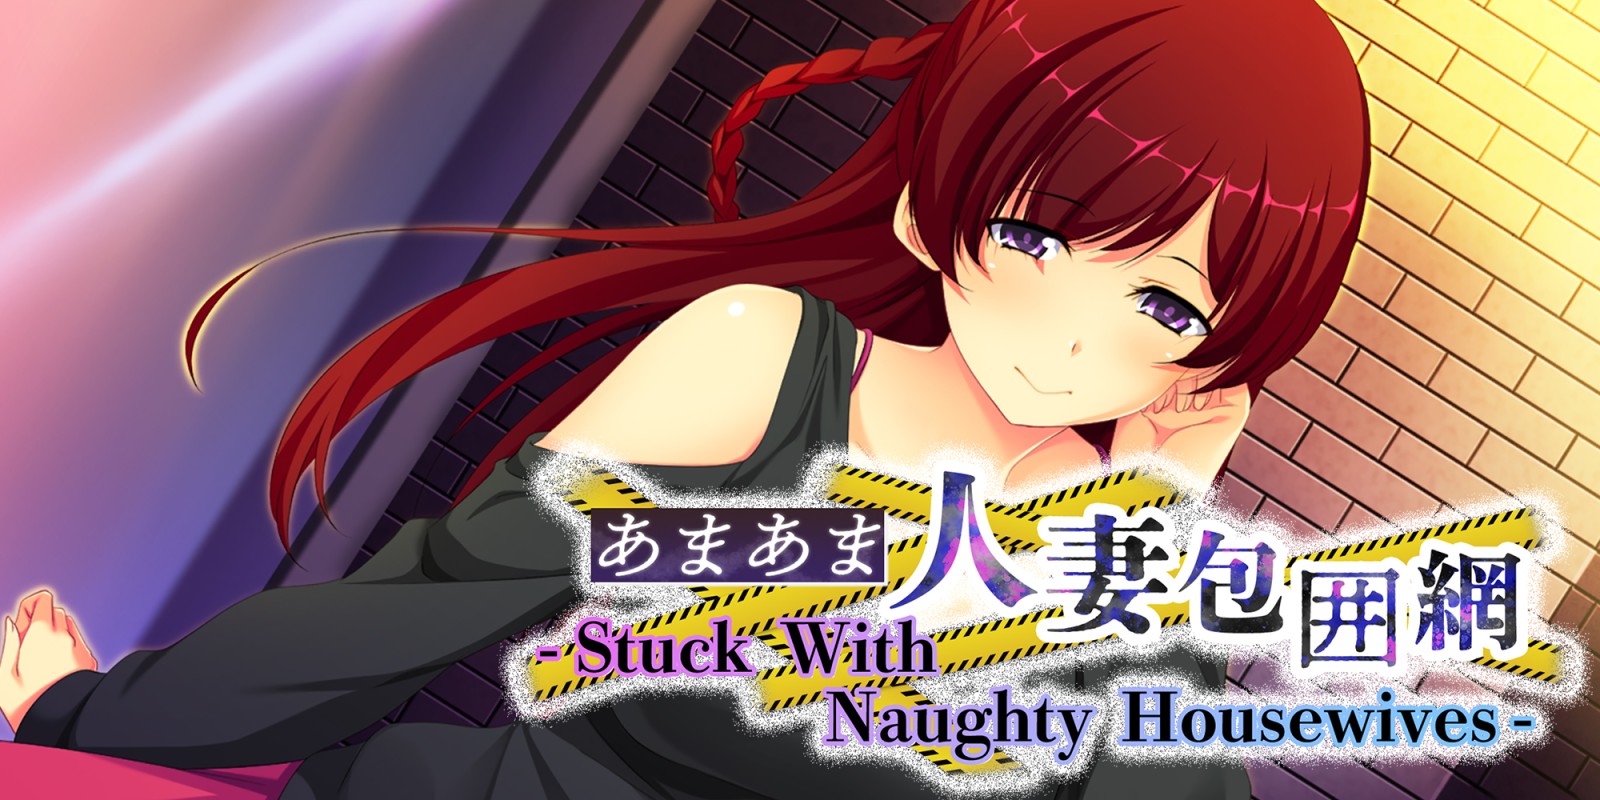 - Stuck With Naughty Housewives - あまあま人妻包囲網